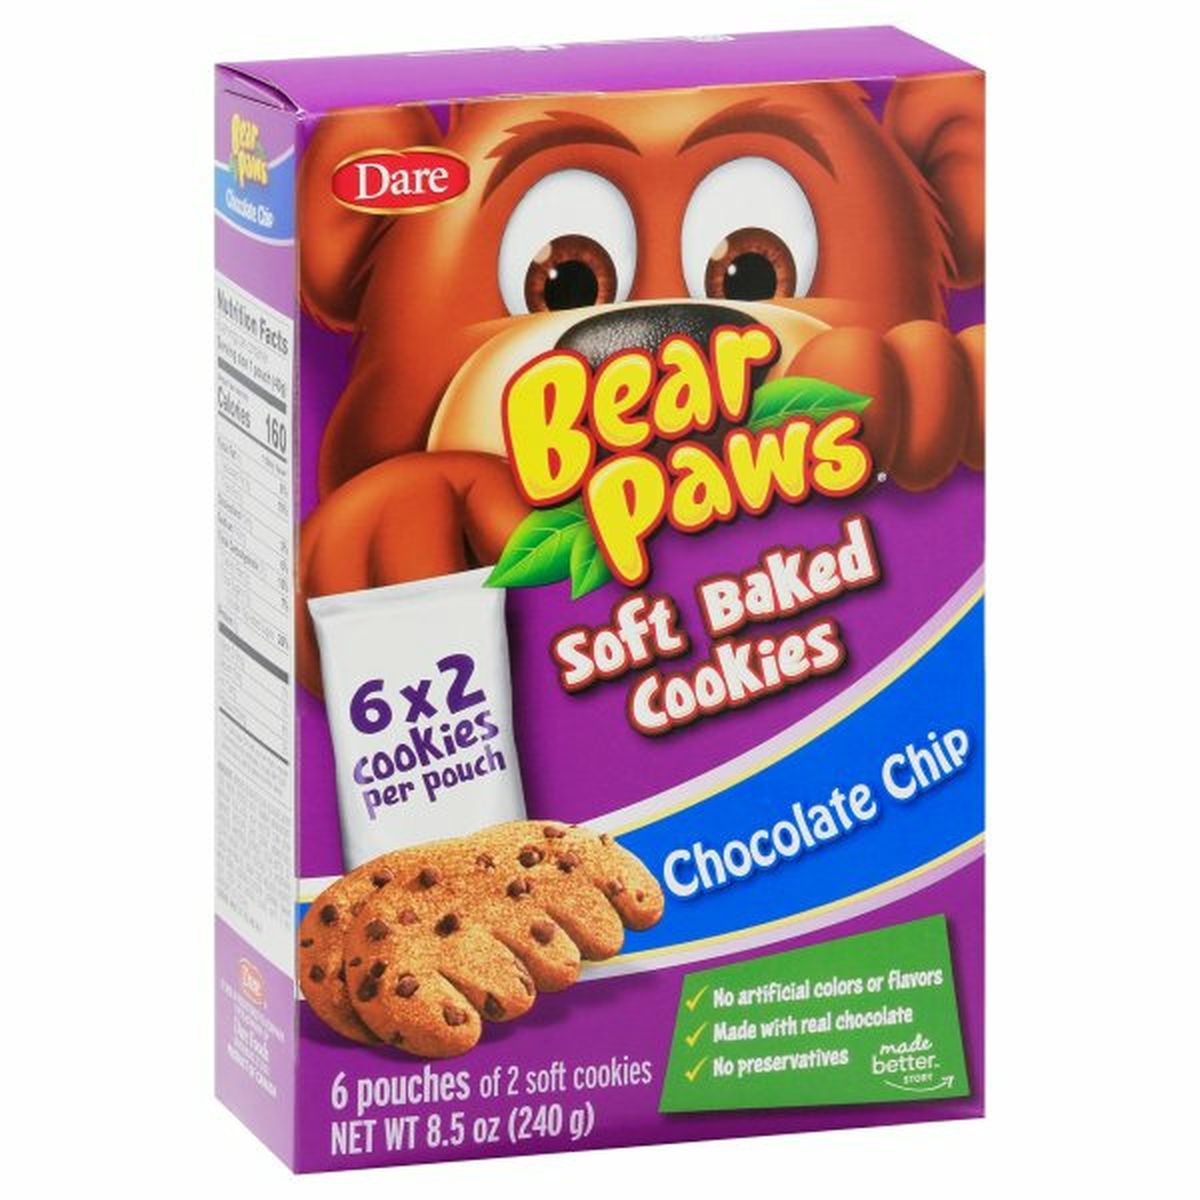 Calories in Dare Bear Paws Cookies, Soft Baked, Chocolate Chip, 6 Pack